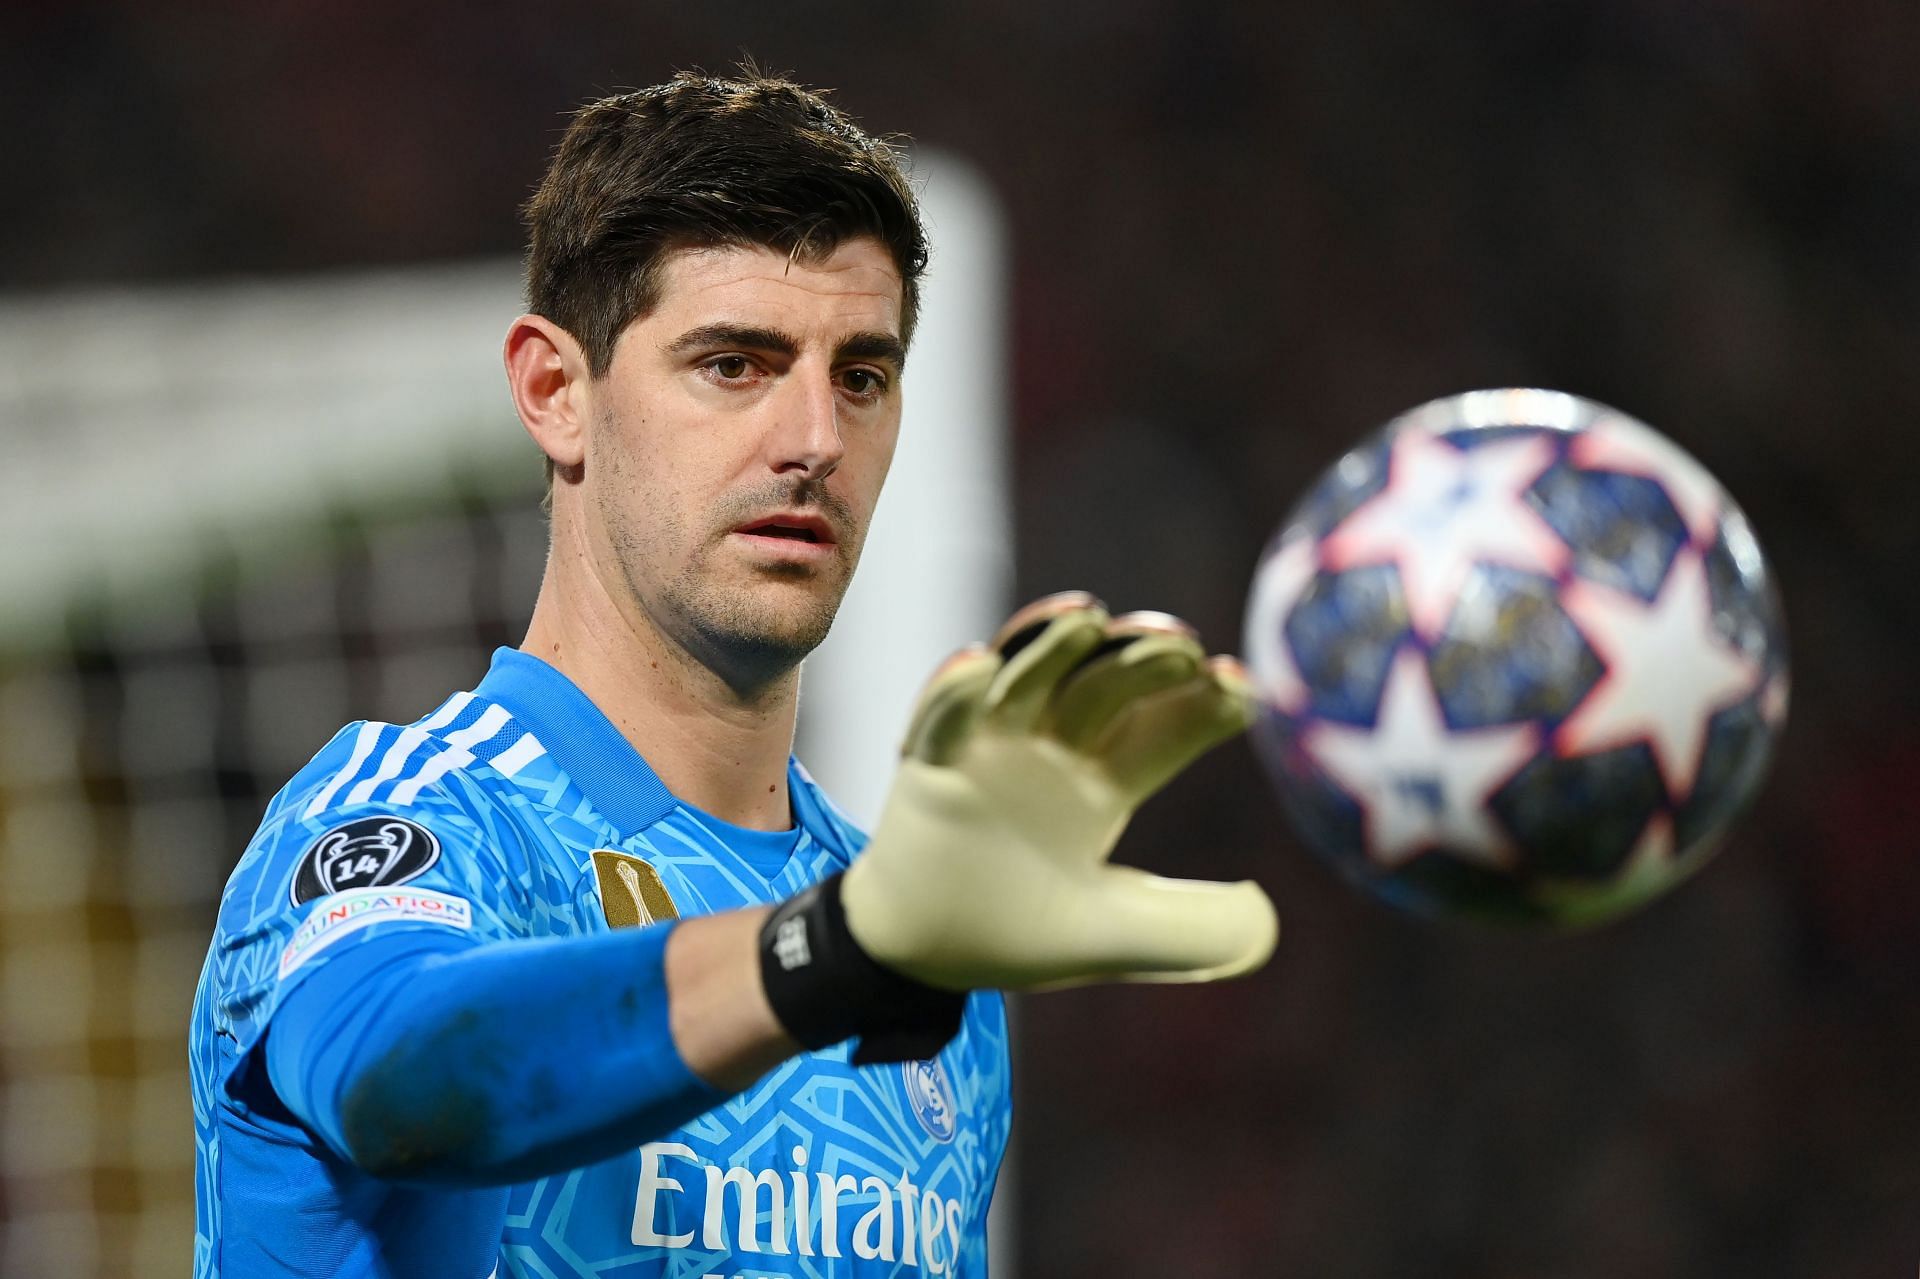 Courtois wishes the tie was put to bed.